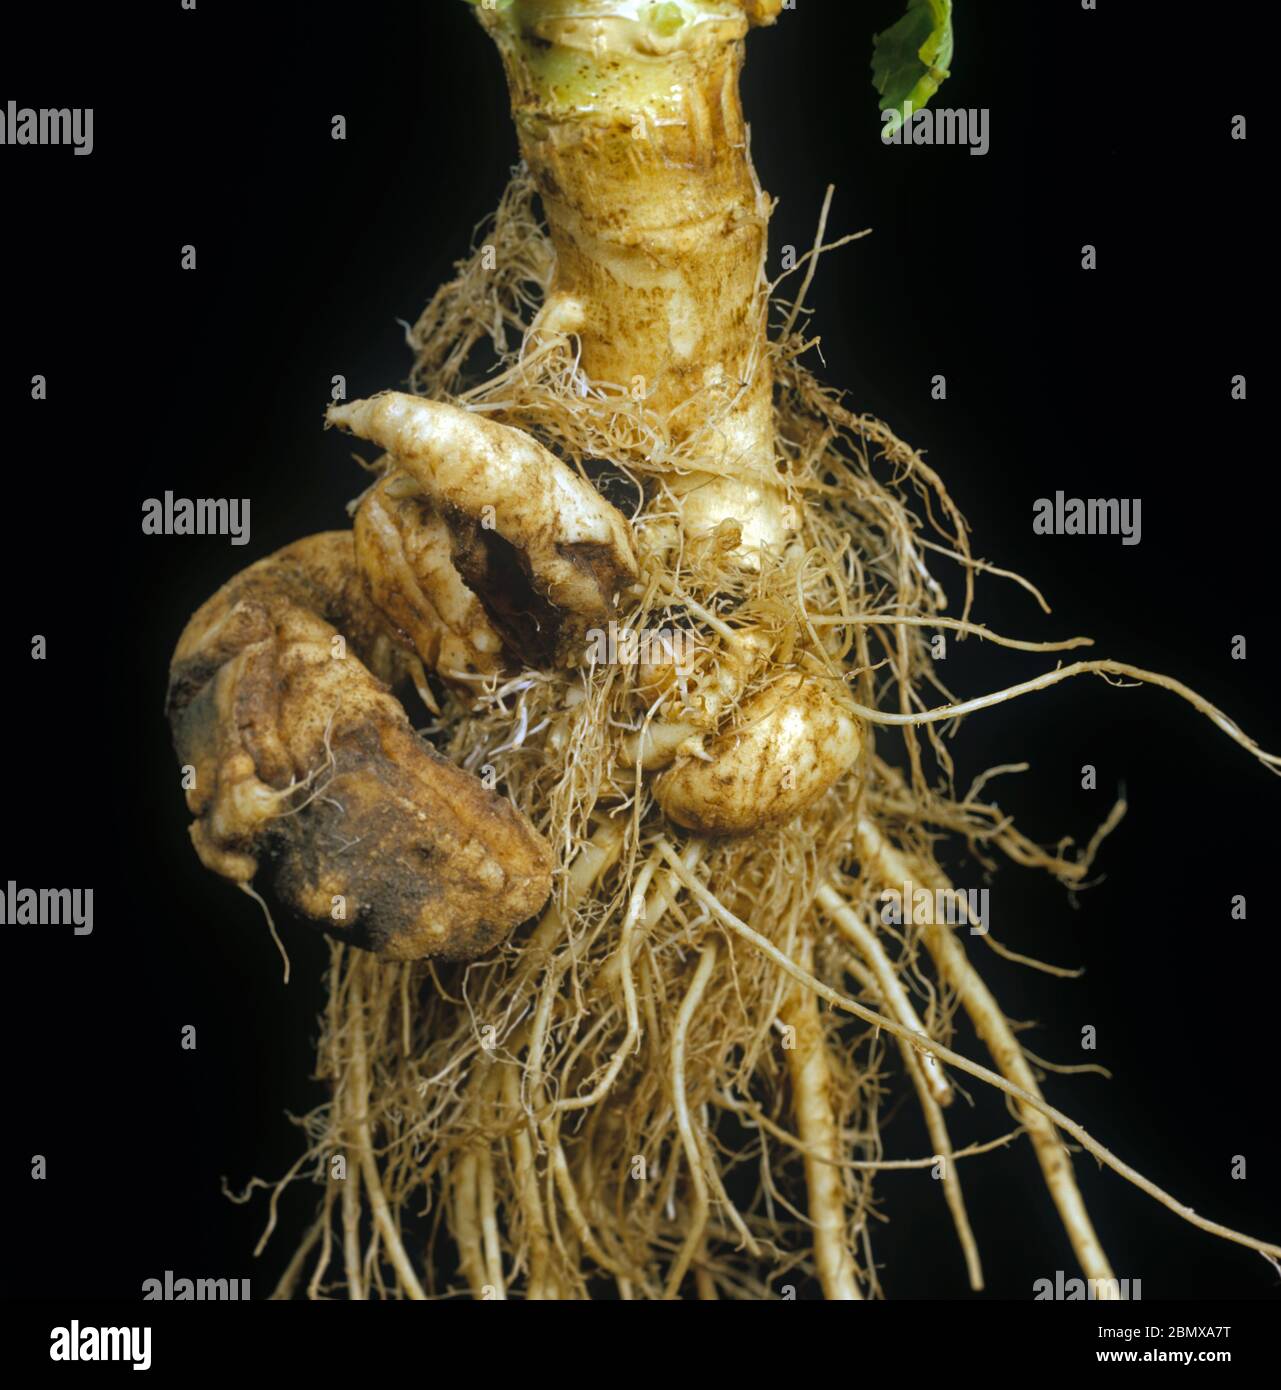 Clubroot (Plasmodiophora brassica) diseased twisted, malformed and distorted root on a cabbage plant Stock Photo